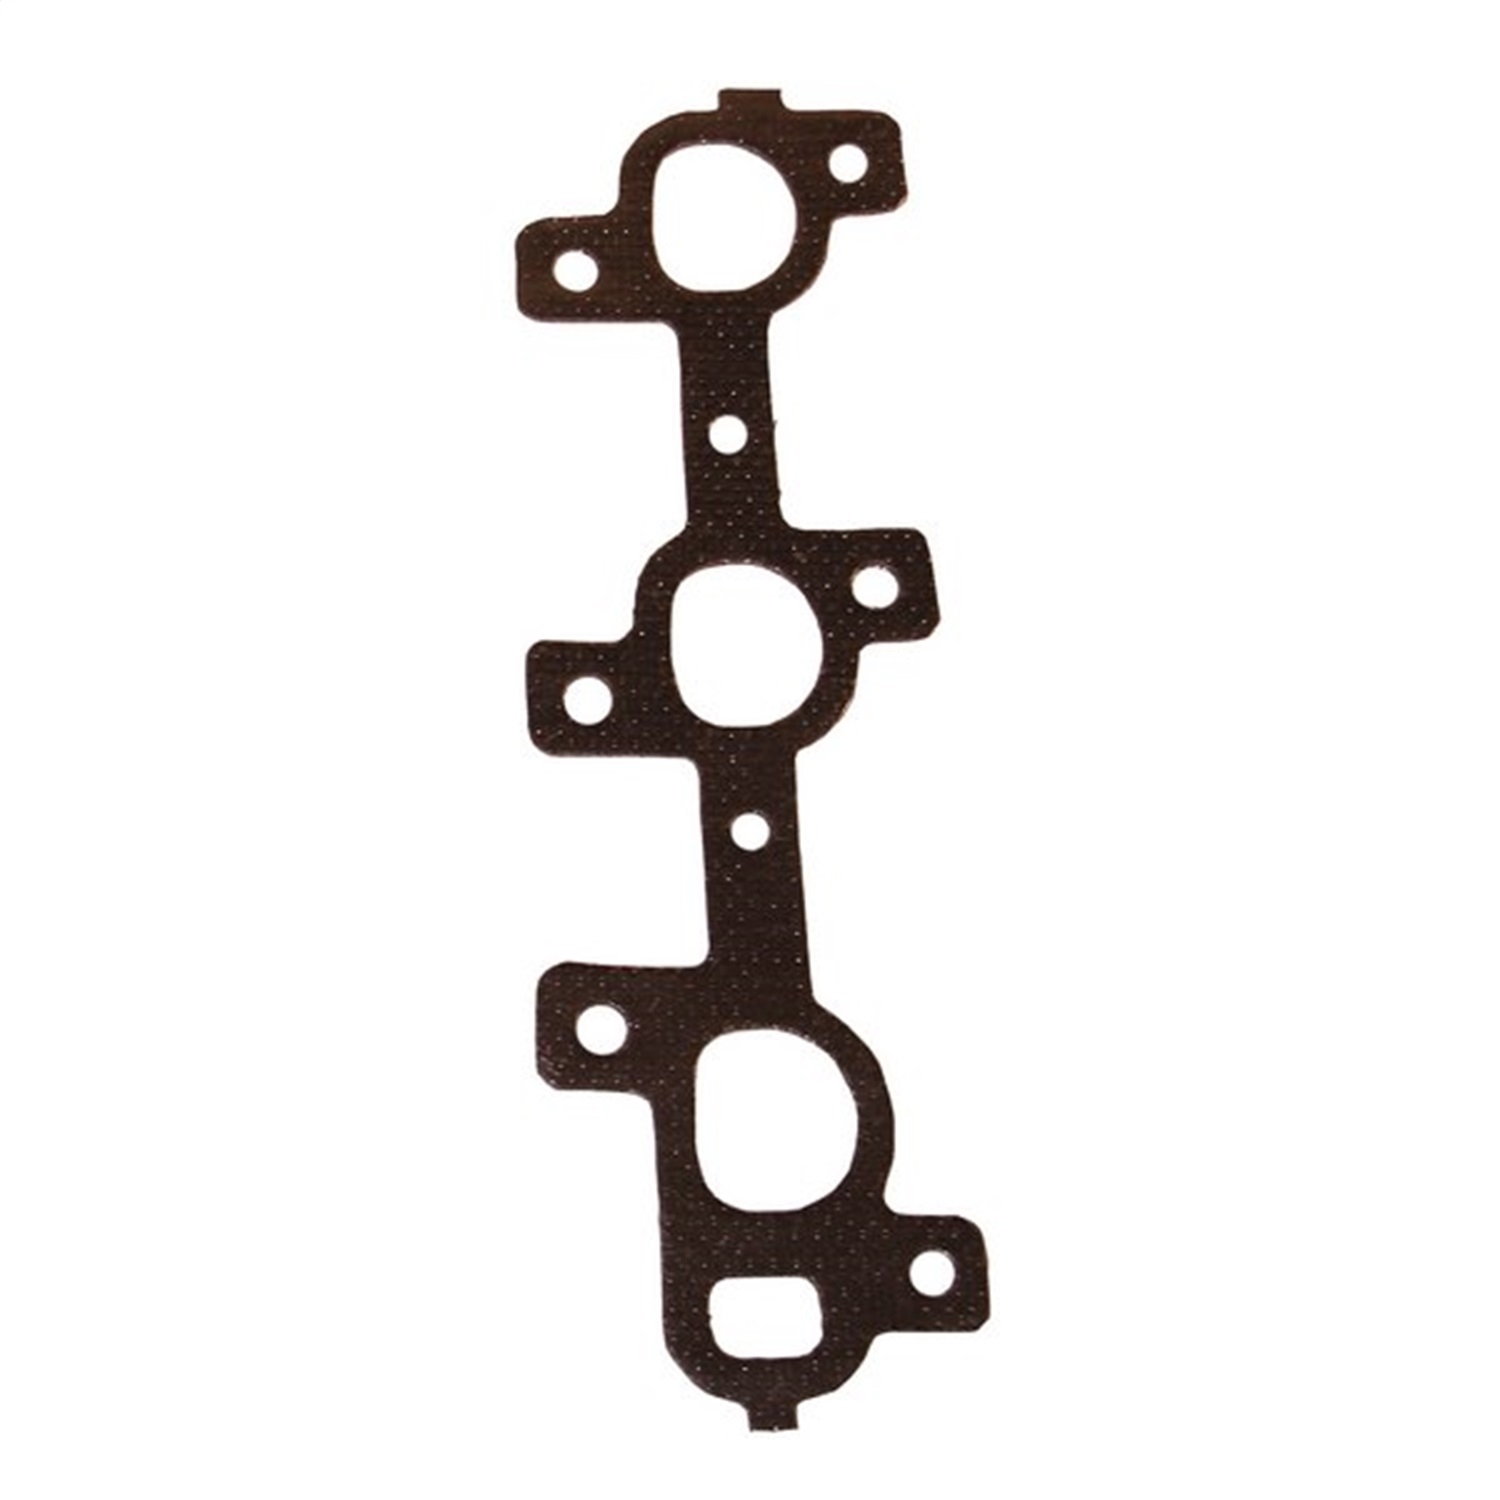 Omix This Exhaust Manifold Gasket From Omix Fits The Right Side Of The 3.7L Engine Found In 05-07